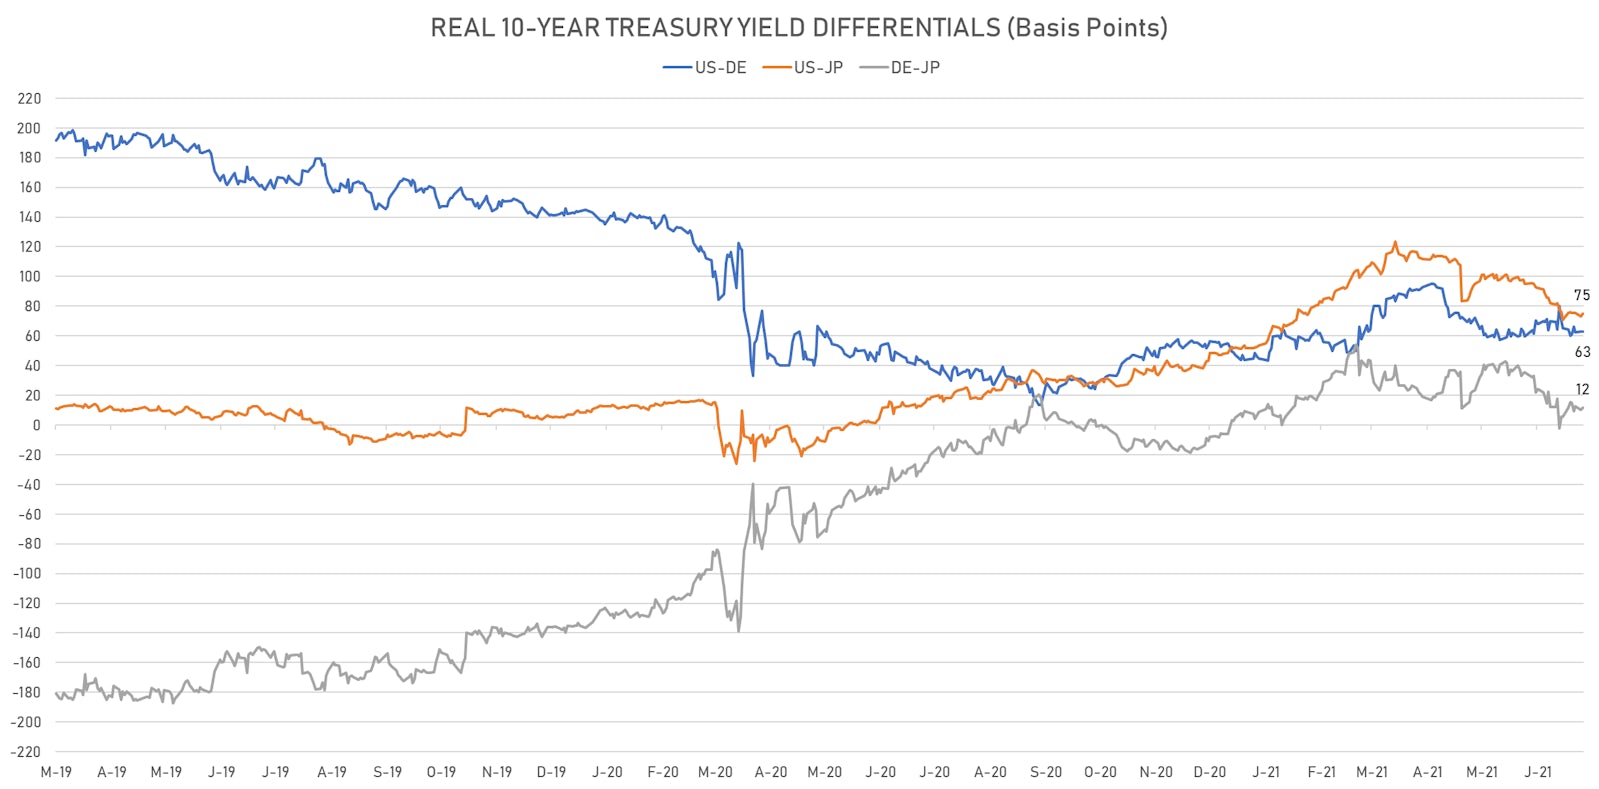 10-Year Real Rates Differentials | Sources: ϕpost, Refinitiv data